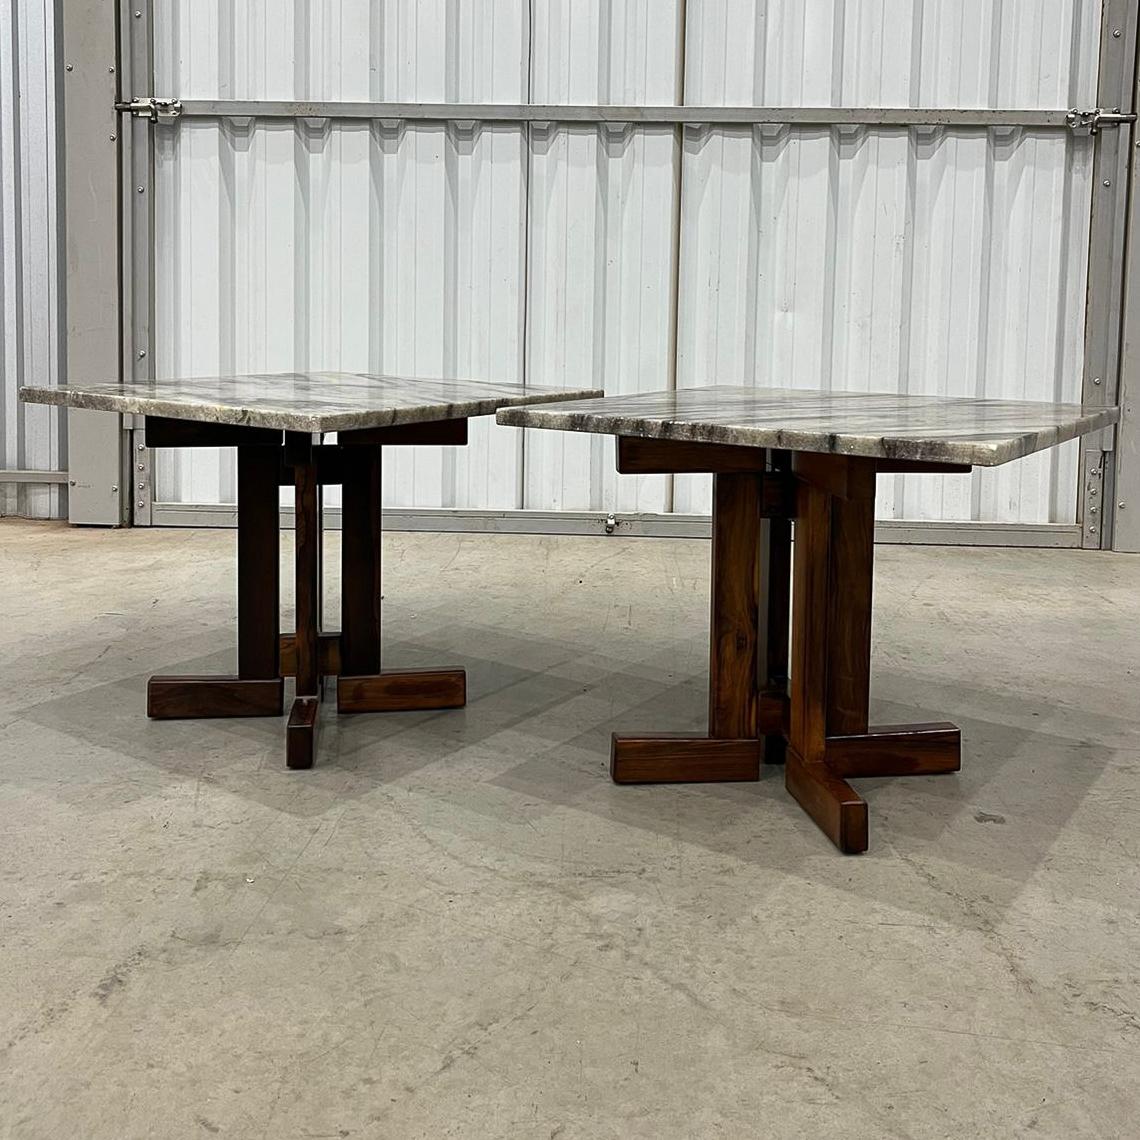 Brazilian Modern Pair of Side Tables in Rosewood and Granite by Celina, c. 1960 For Sale 1